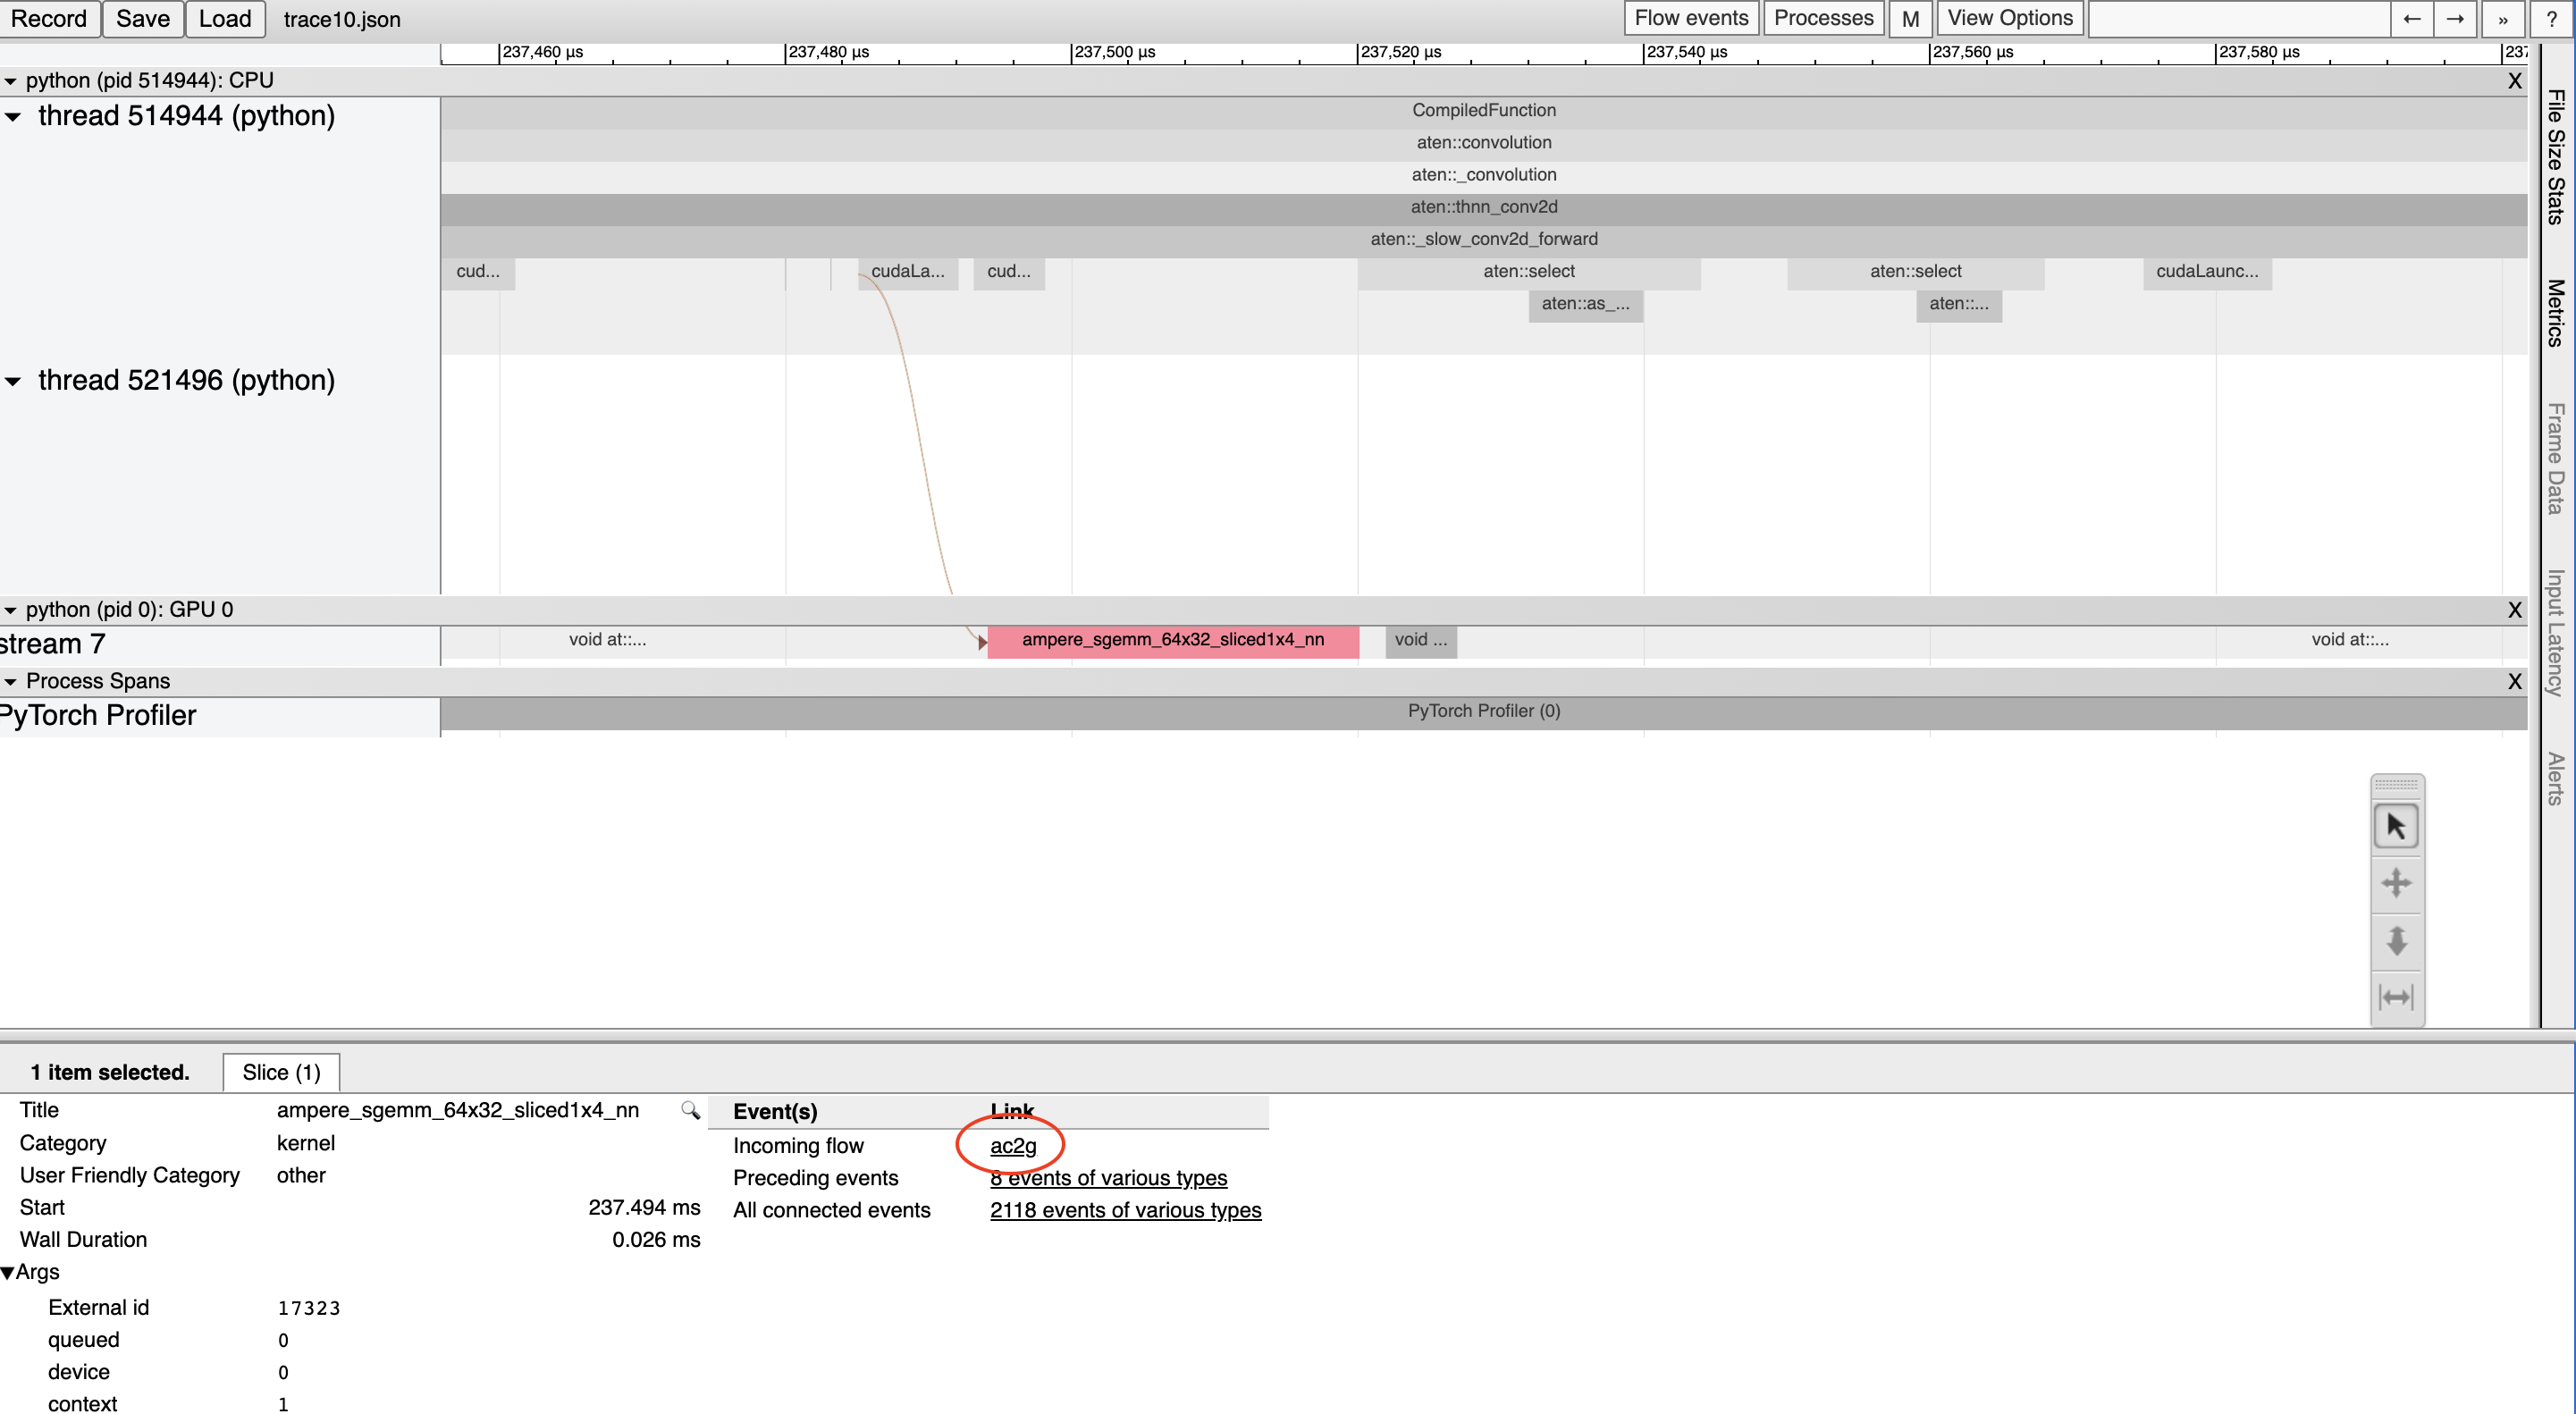 Visualization in the chrome://trace viewer, showing an async flow between a kernel and its launching location.